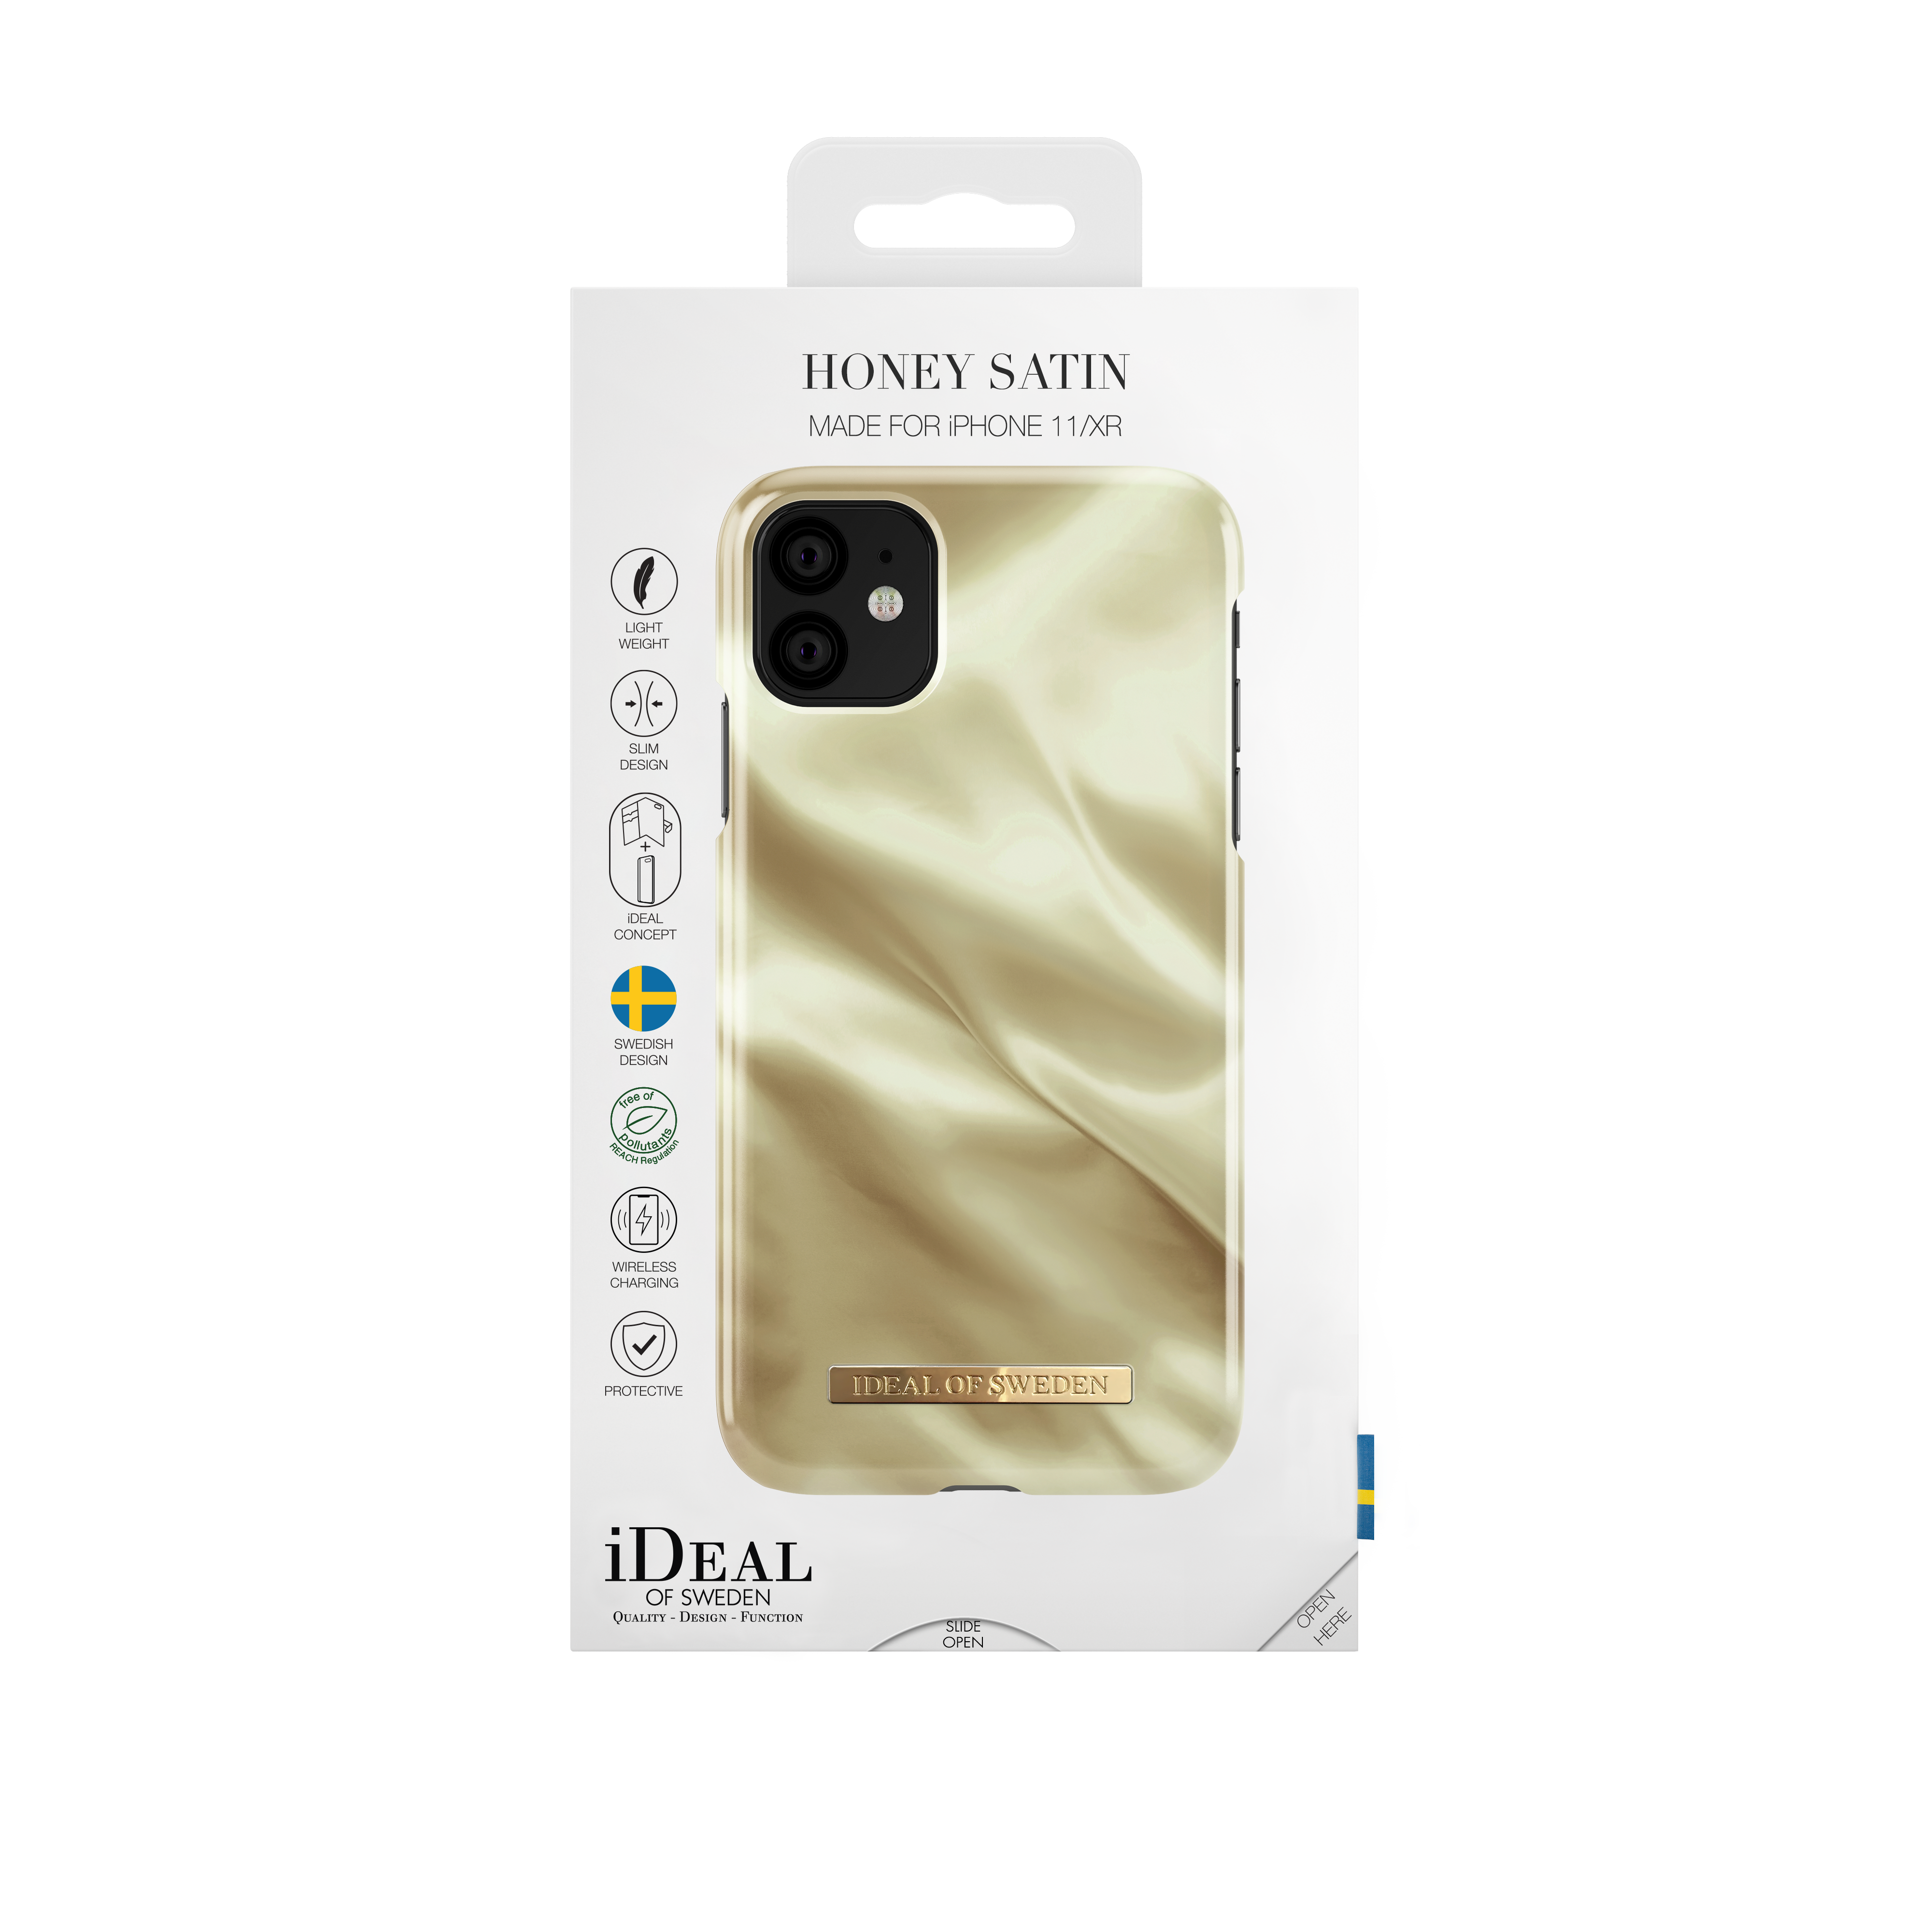 IDEAL OF SWEDEN iPhone Backcover, Honey Apple, Satin XR, iPhone 11, IDFCSC19-I1961-188